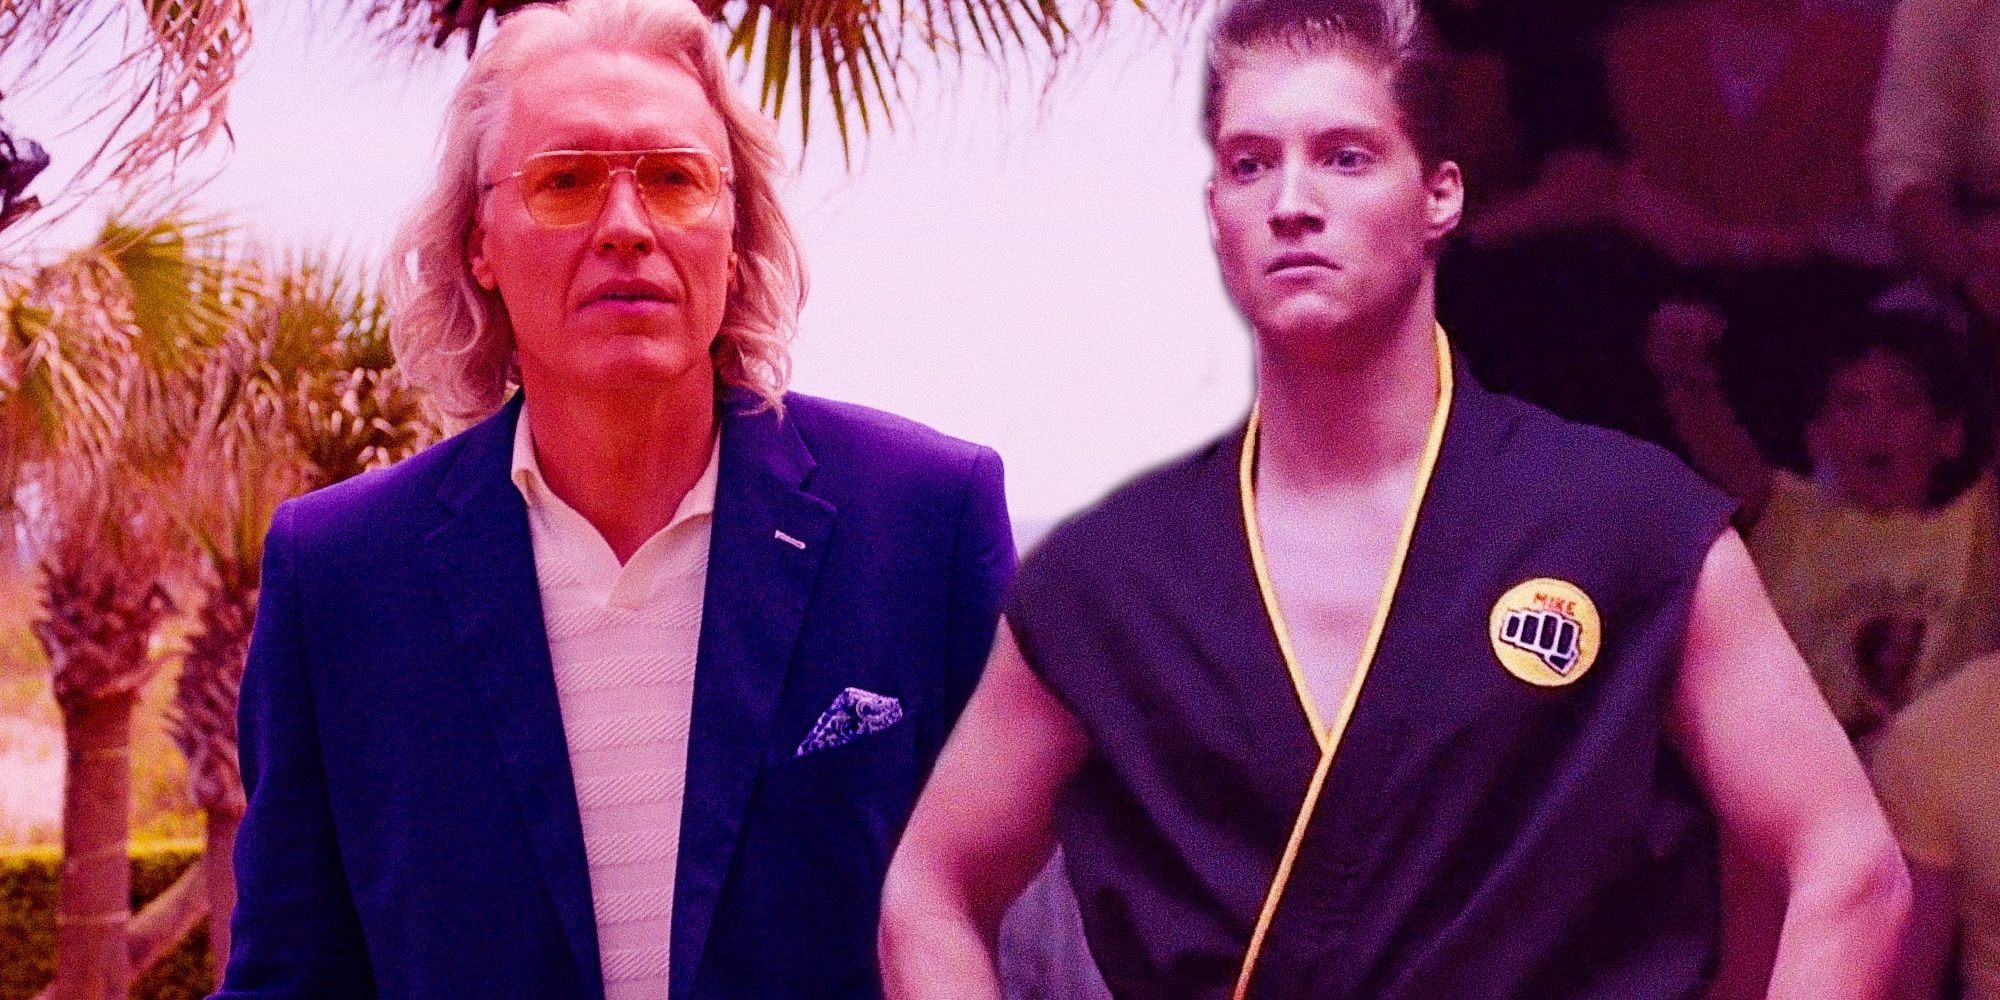 Cobra Kai theory: mike barnes and terry silver end up like johnny and kreese